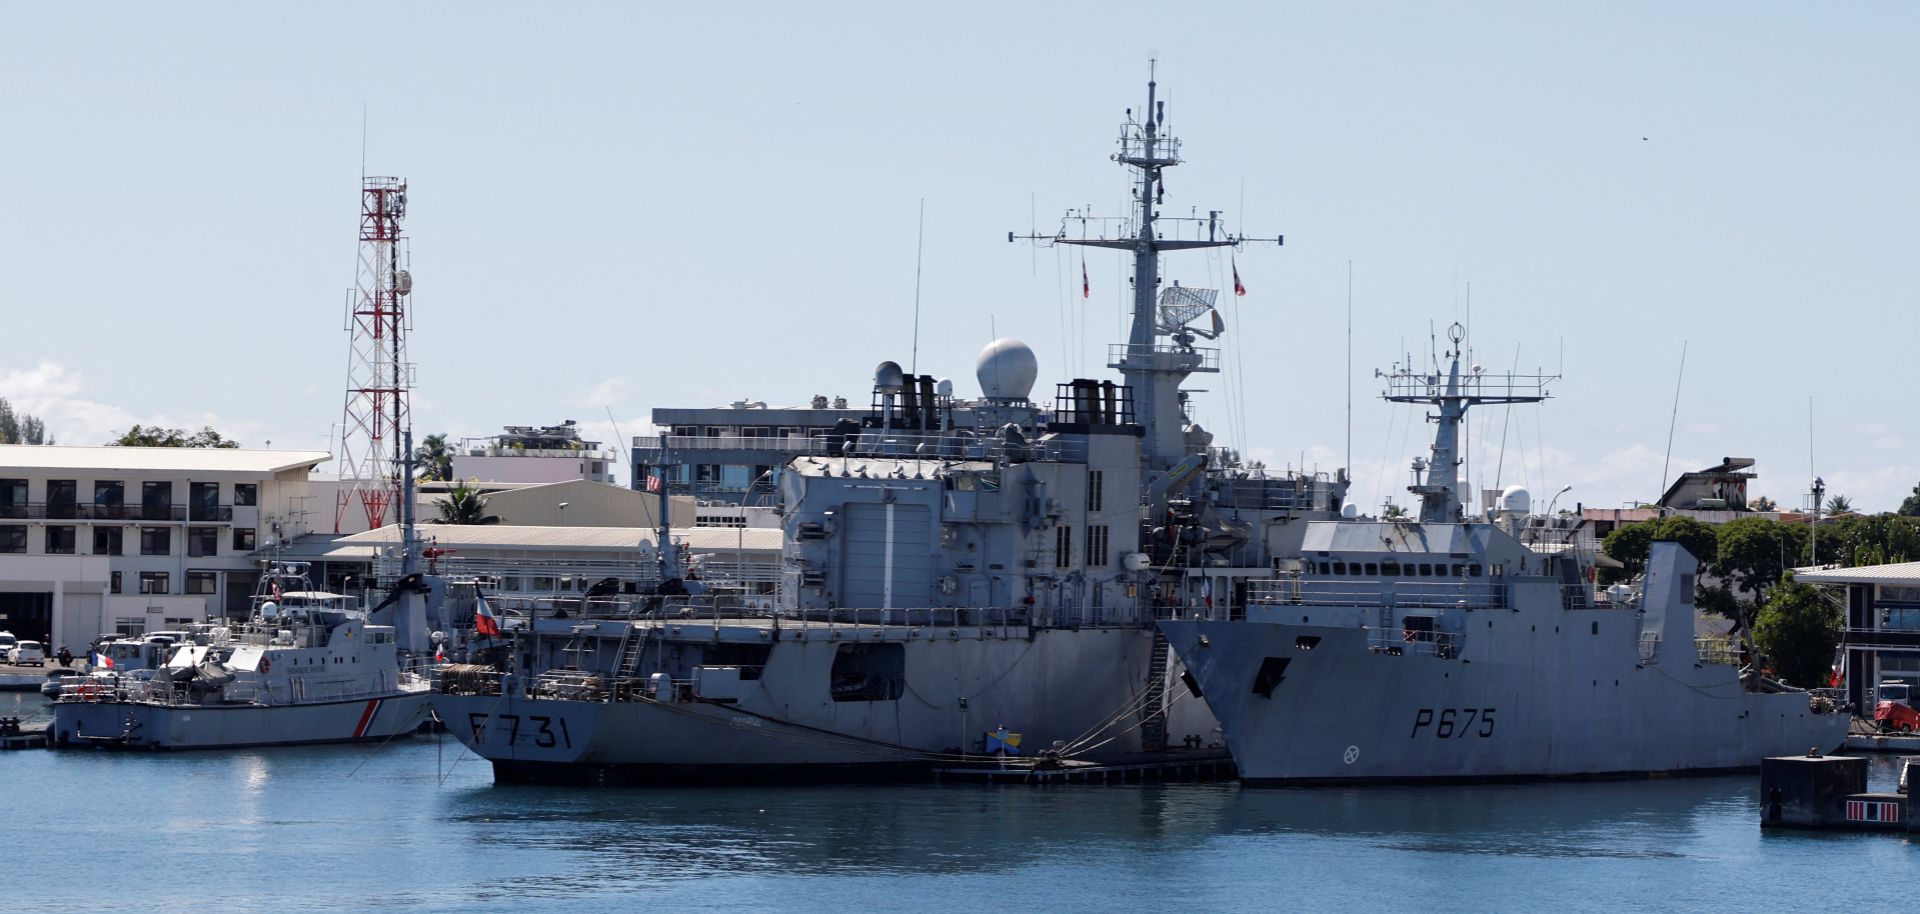 A French Navy surveillance frigate (center) and coastal patrol vessel (right) are seen moored in the harbor of Papeete, Tahiti, in French Polynesia on July 23, 2021. 